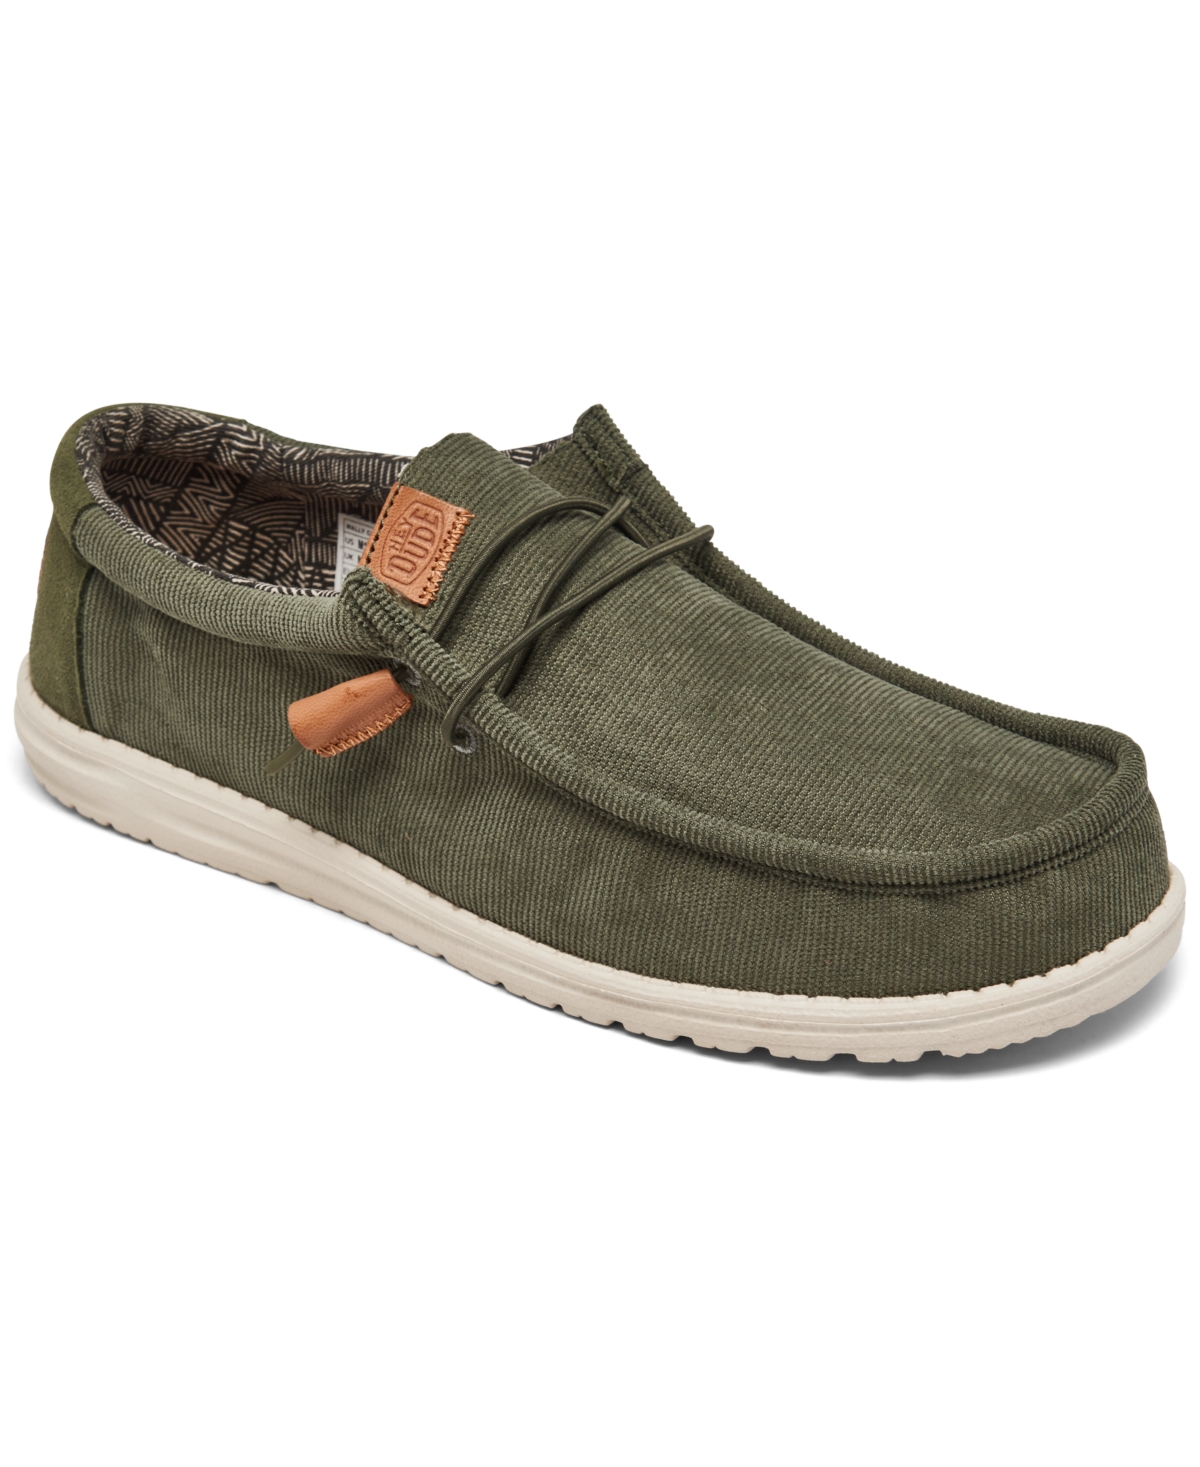 Men's Wally Corduroy Casual Moccasin Sneakers from Finish Line - Desert Green